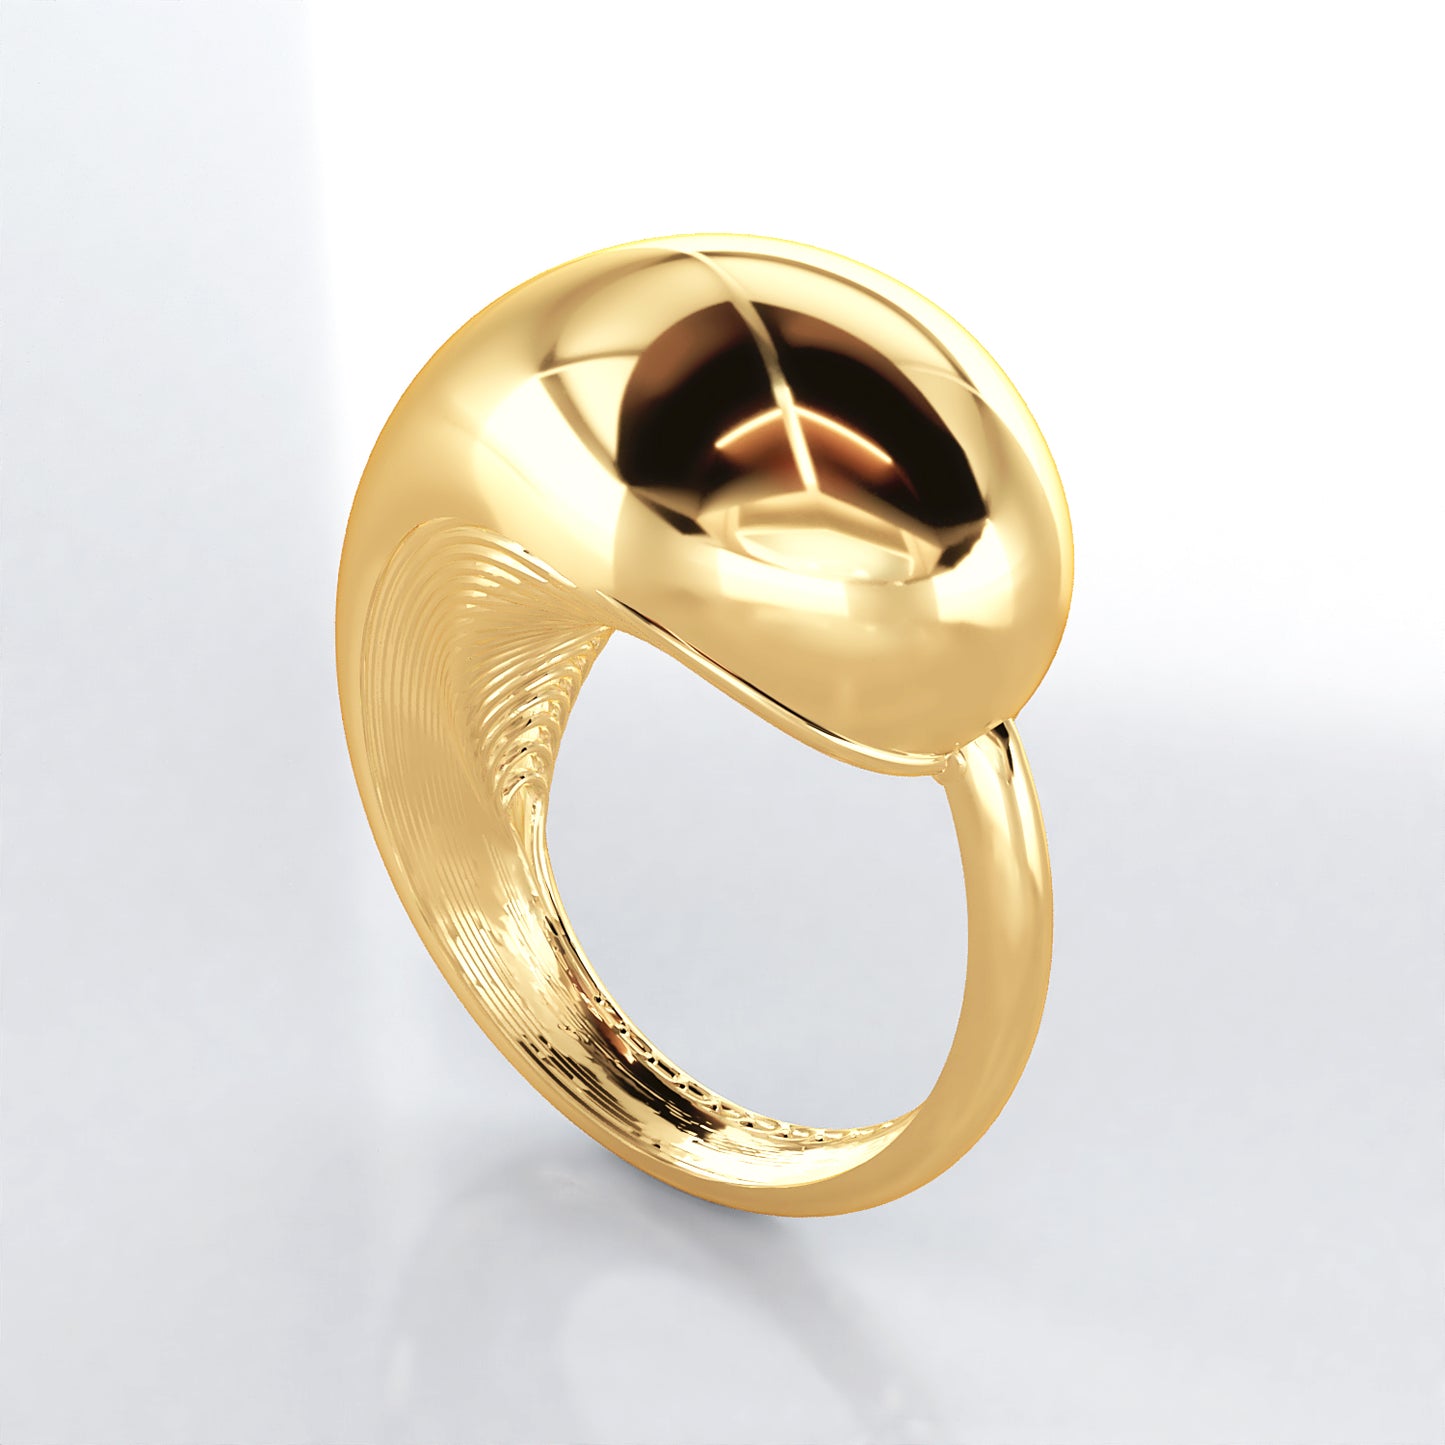 Beginning: 18ct Yellow Gold-Plated Sterling Silver Ring